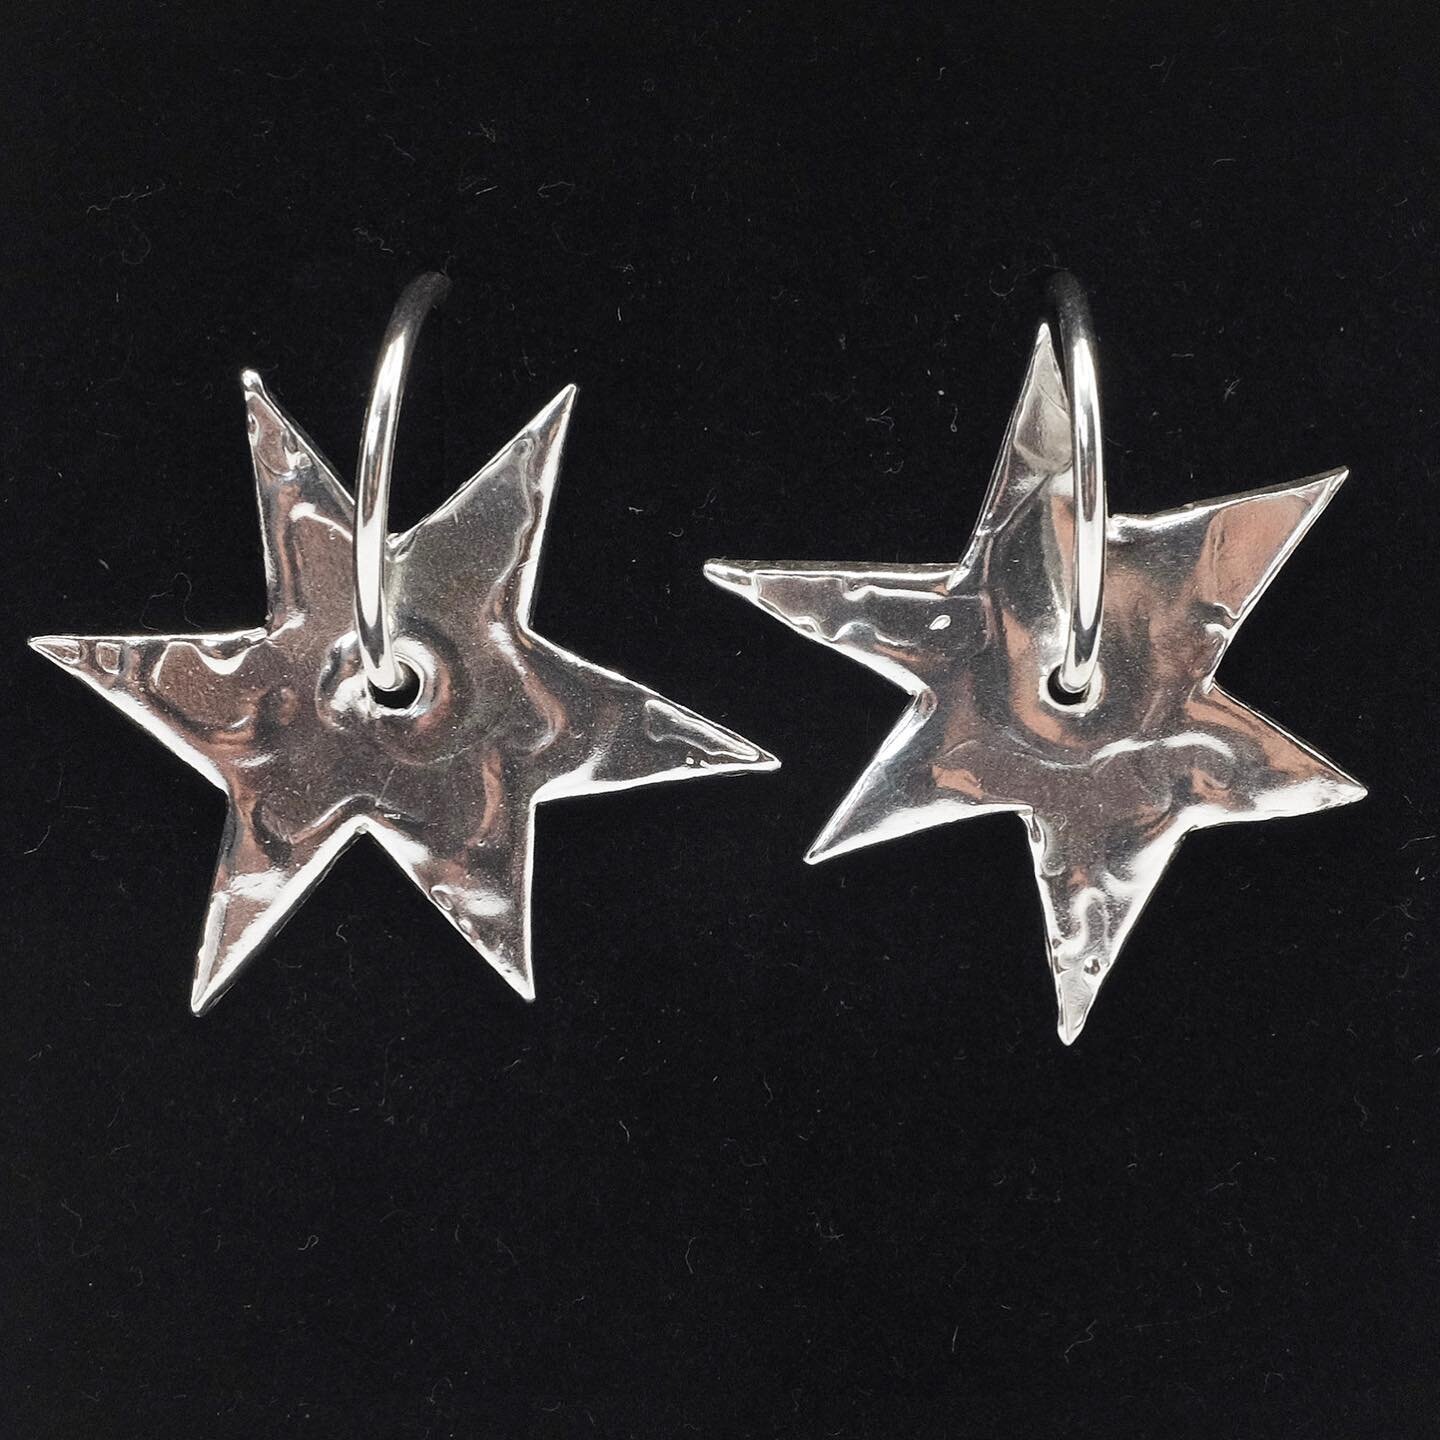 I&rsquo;ve just uploaded 2 pairs of these wonky star hoops to my website !!!!!! 💥🌞

If they don&rsquo;t go they&rsquo;ll be coming with me to @twobytwotap @spinning.superiority on Saturday ✨

&lsquo;A pair of free moving statement molten stars on 2